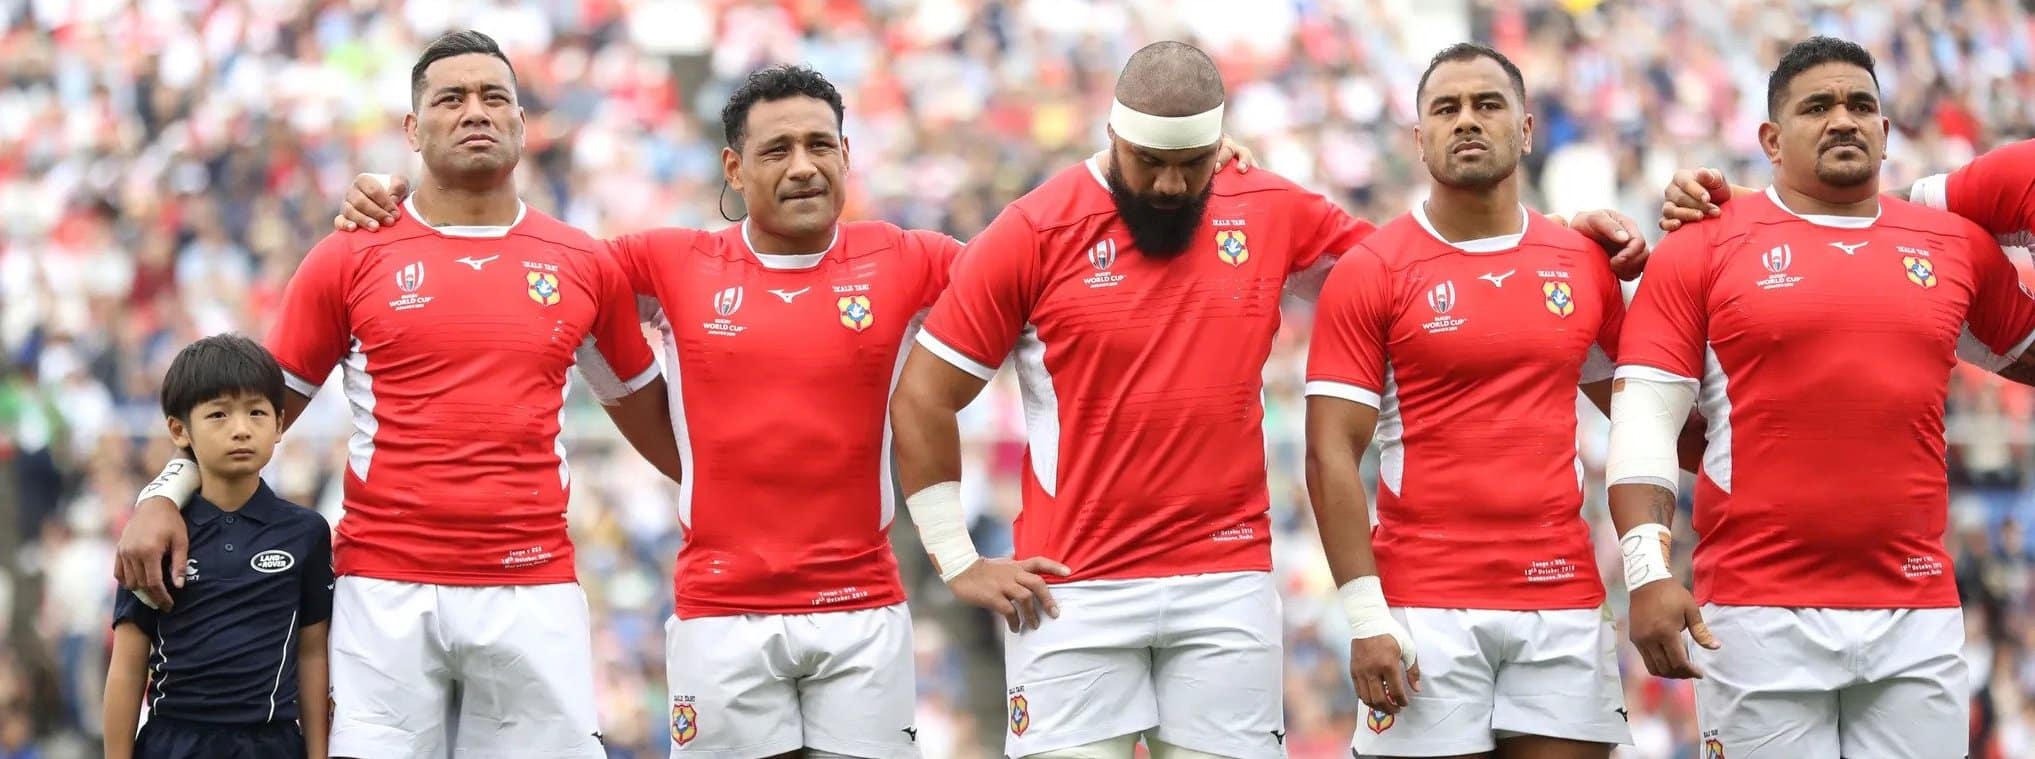 Tonga Rugby Union And World Rugby Begin Rugby Rebuilding Following Volcanic Eruption And Tsunami